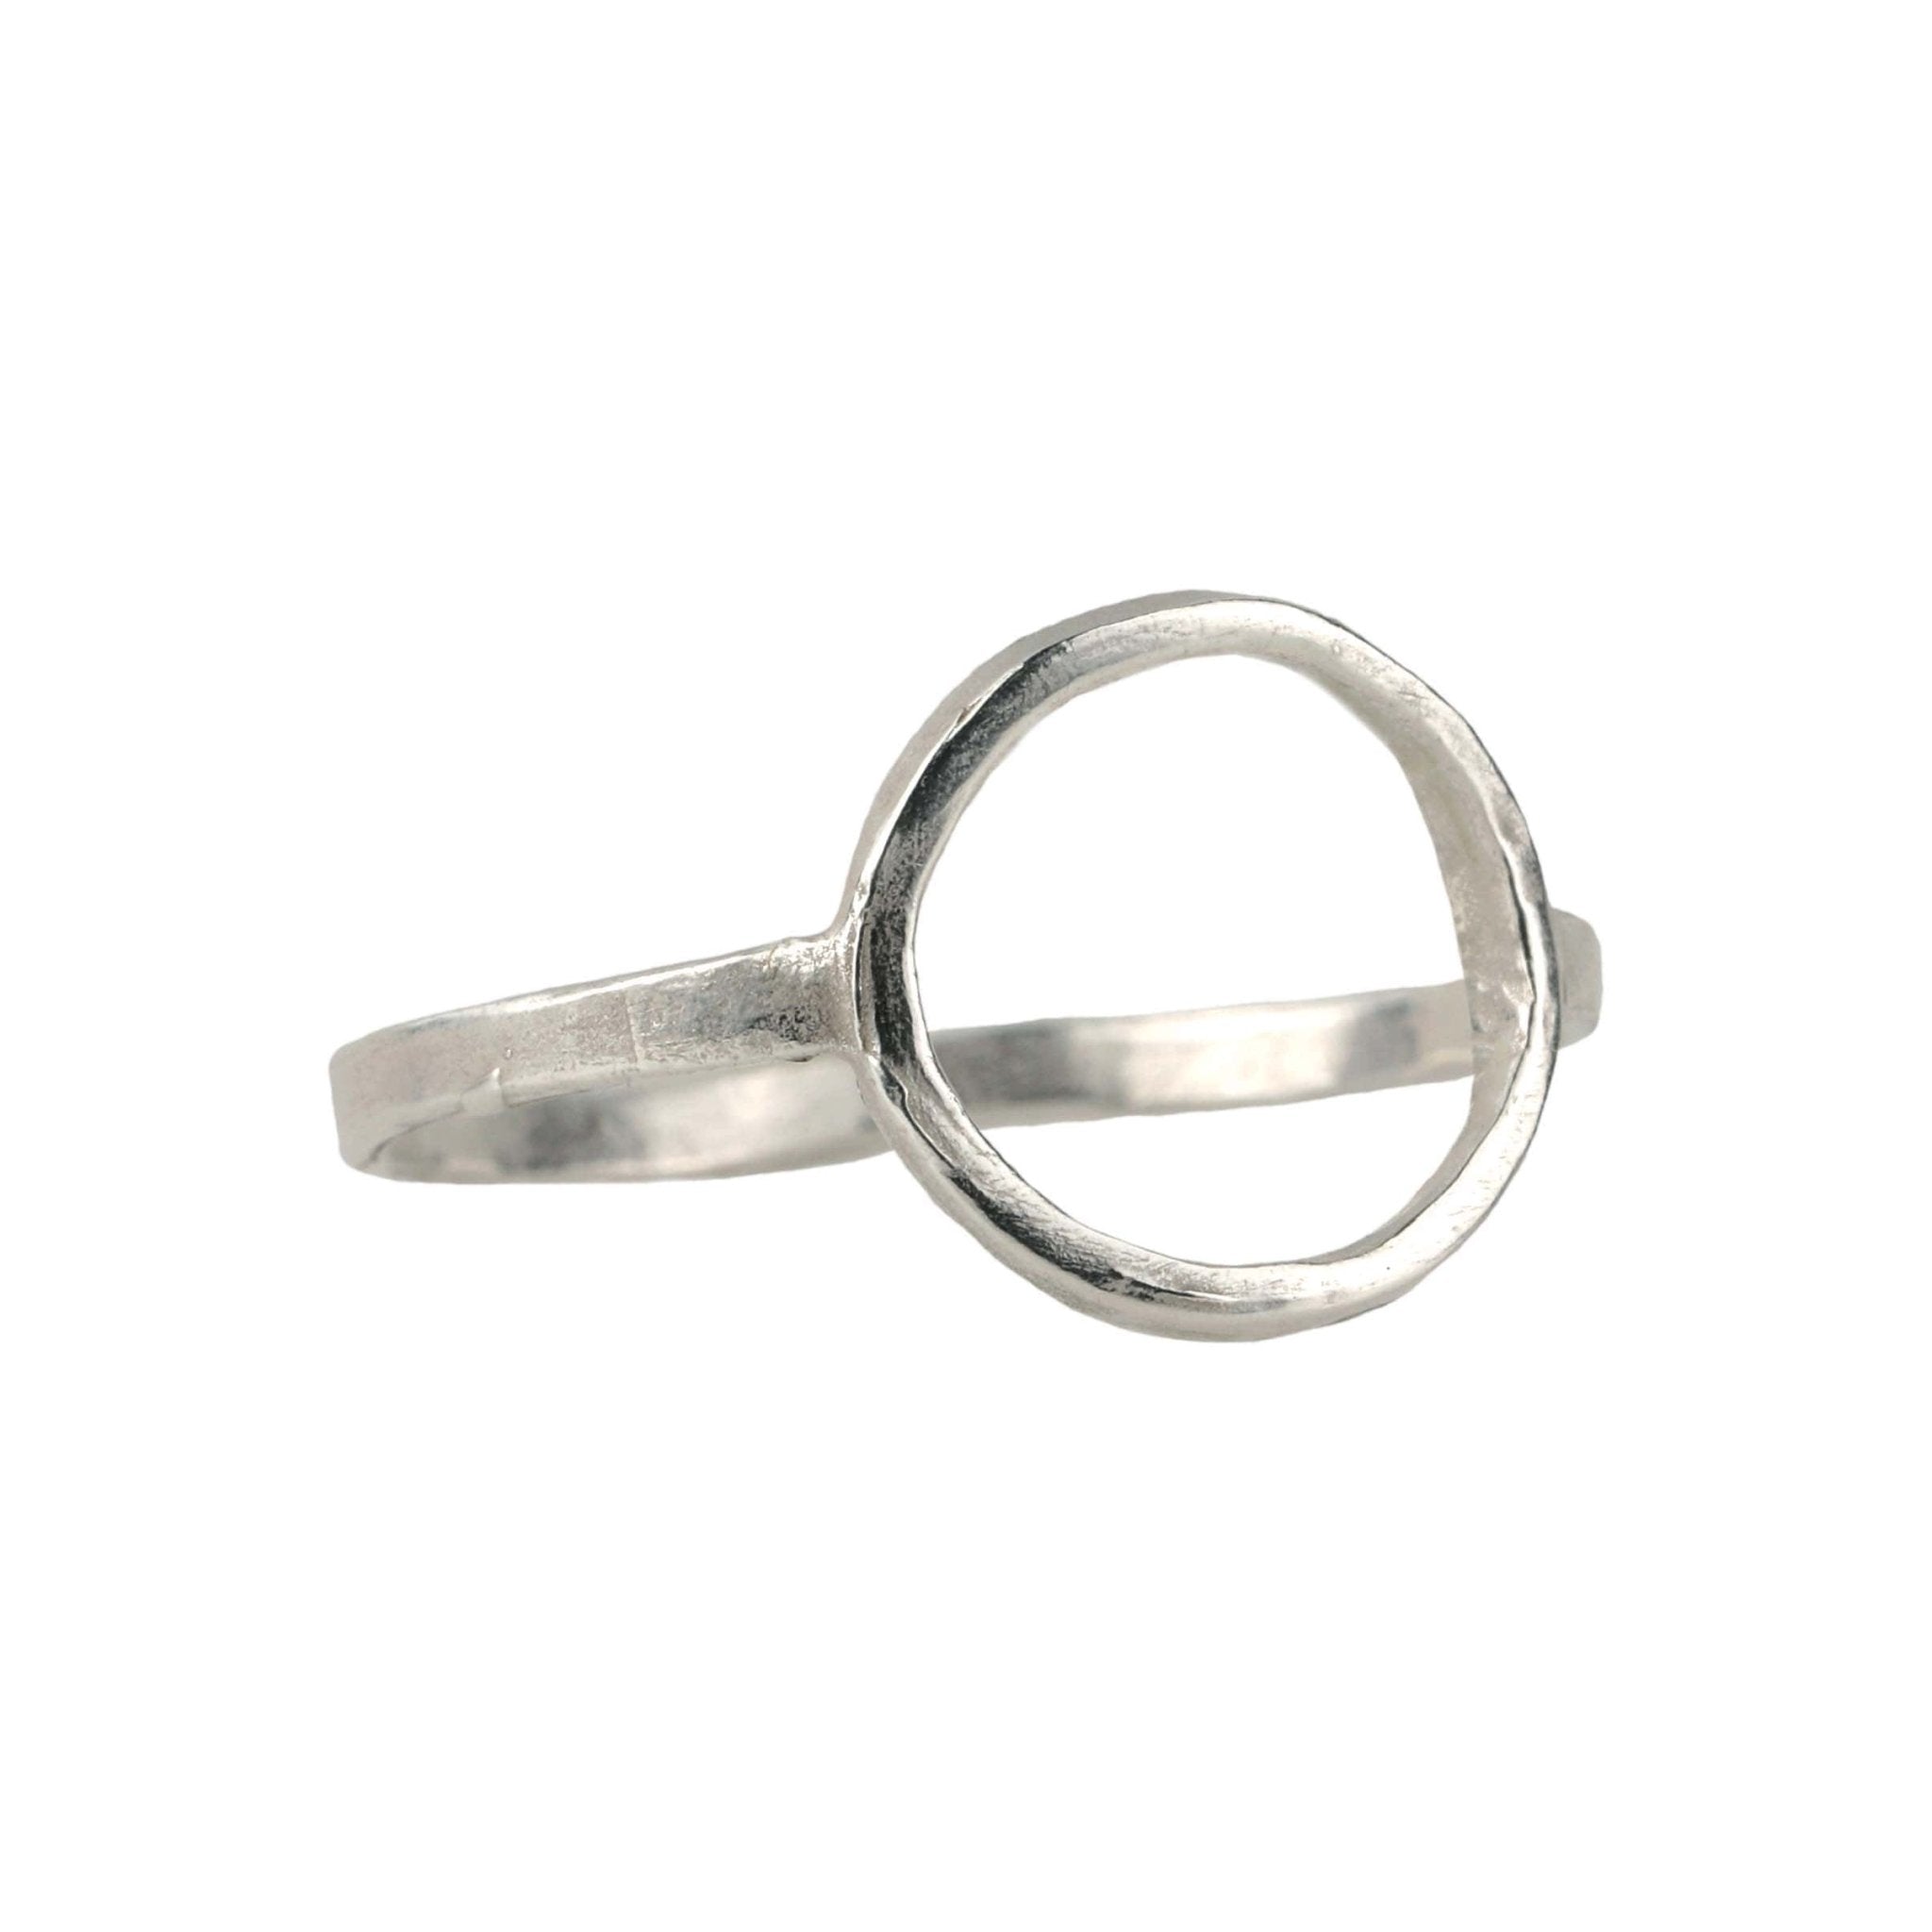 Sarah Macfadden Sterling Silver hammered Ring with Circle in Middle